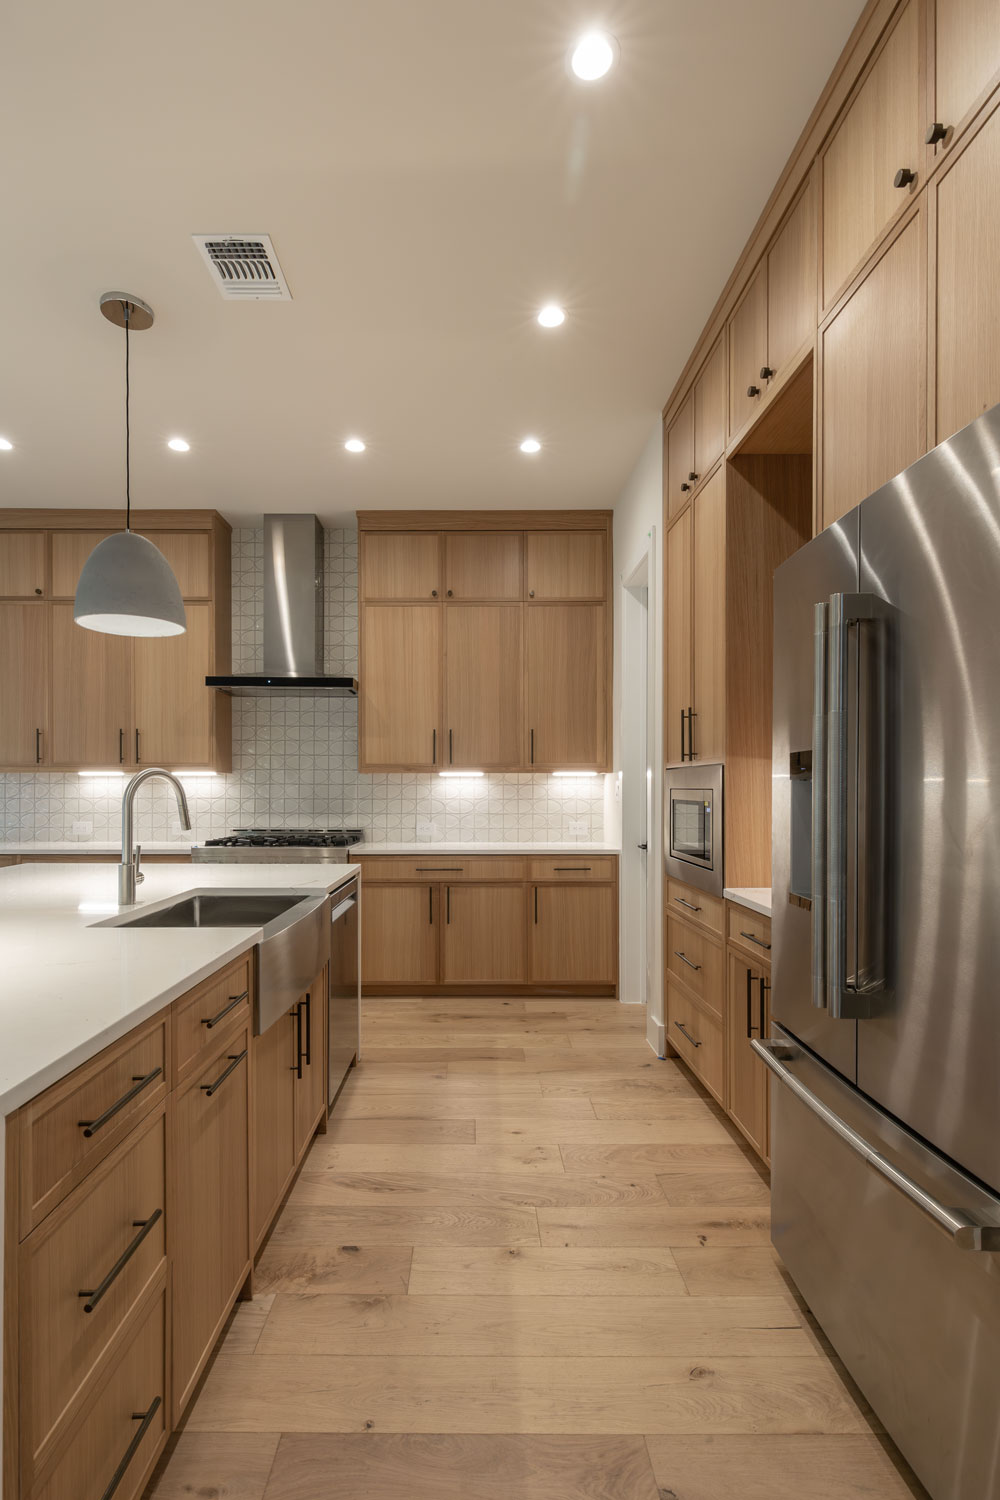 Rift White Oak Cabinet Kitchen with 4S 1" Shaker cabinet doors with narrow shaker frame detail